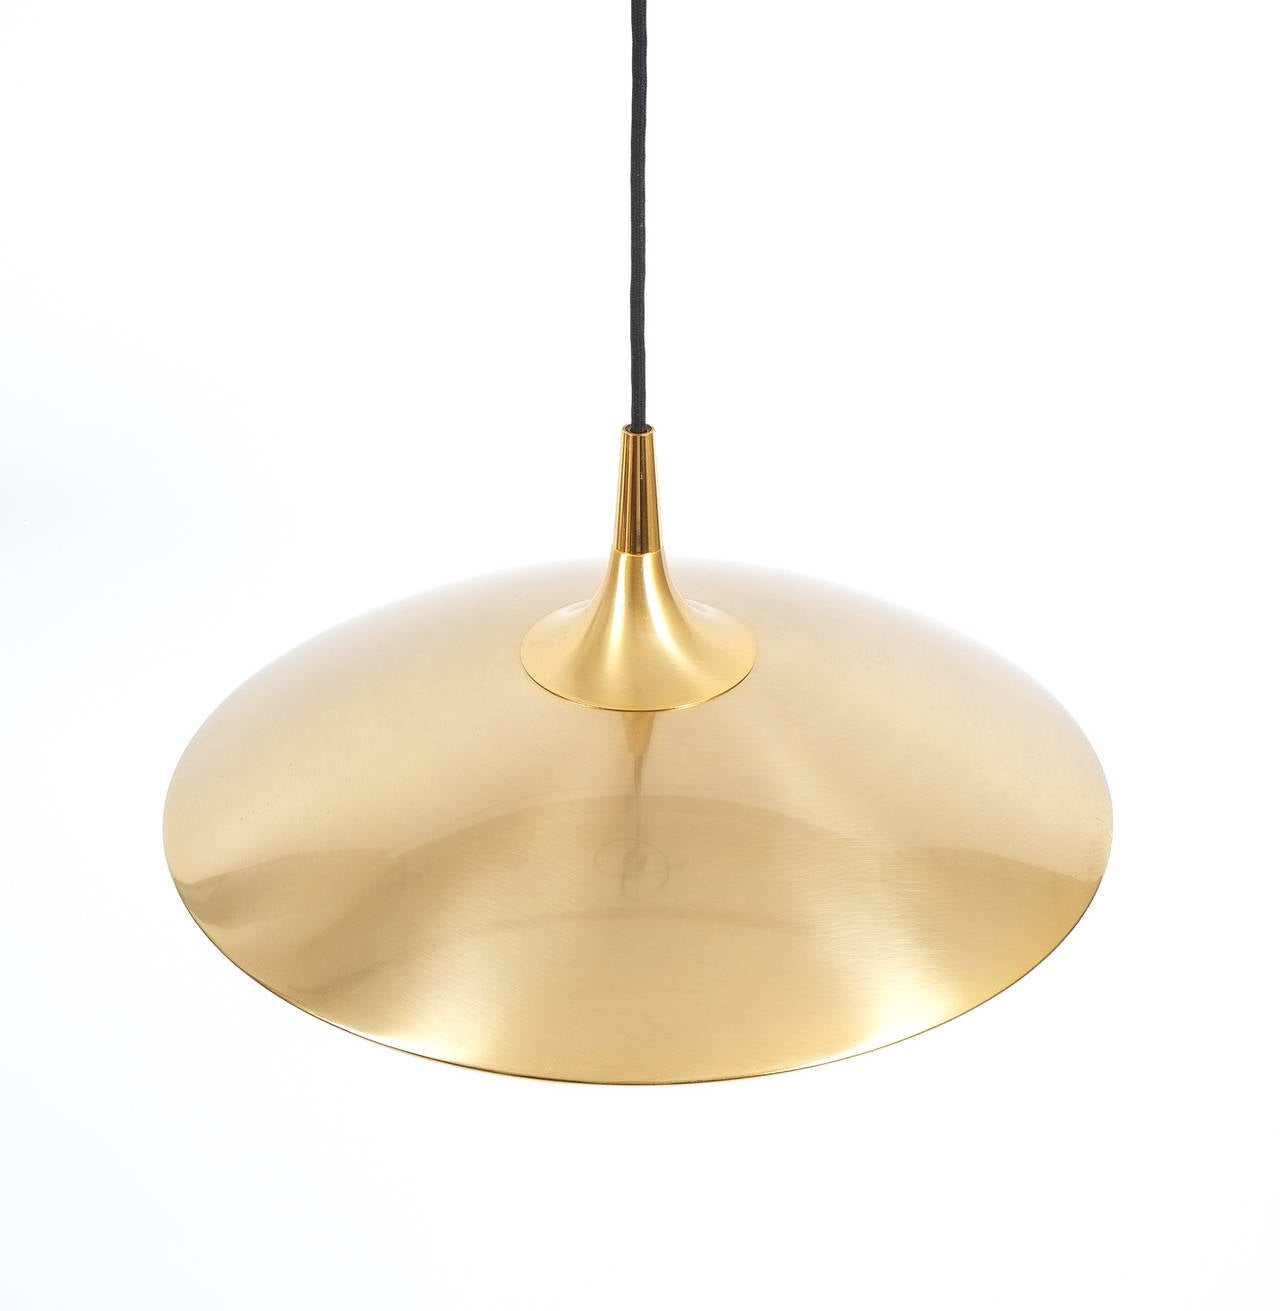 Elegant polished brass pendant by Florian Schulz/Germany. Very well made piece with a brass finish. The condition is very good with minimal patina; it holds one bulb with a max. of 100Watts. 
The black cord wire can be customized in length and